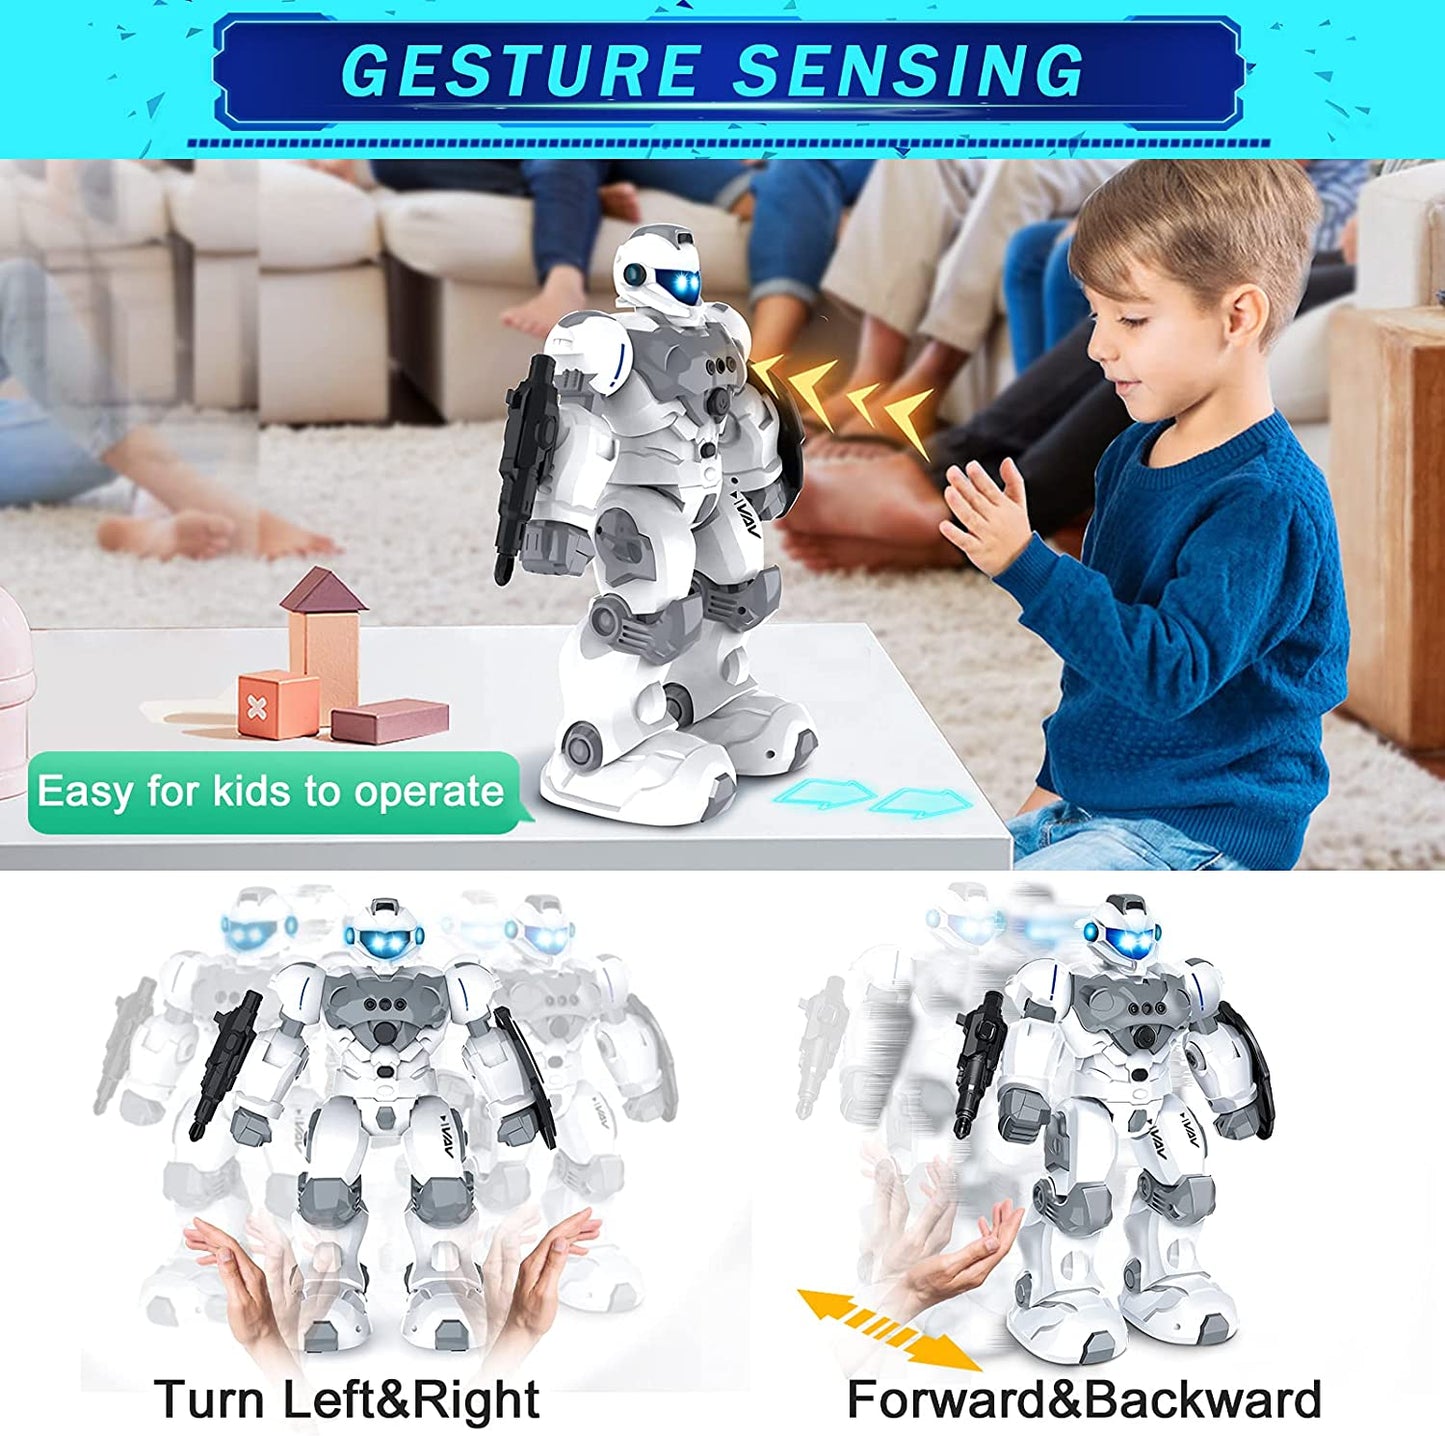 Toys for 6-10 Year Old Boys Girls, Remote Control Robot Gifts for Kids, Rechargeable Intelligent Programmable Robot Toyswith 2.4GHz Gesture Sensing, Christmas Birthday Presents for Kids Age 6 7 8 9